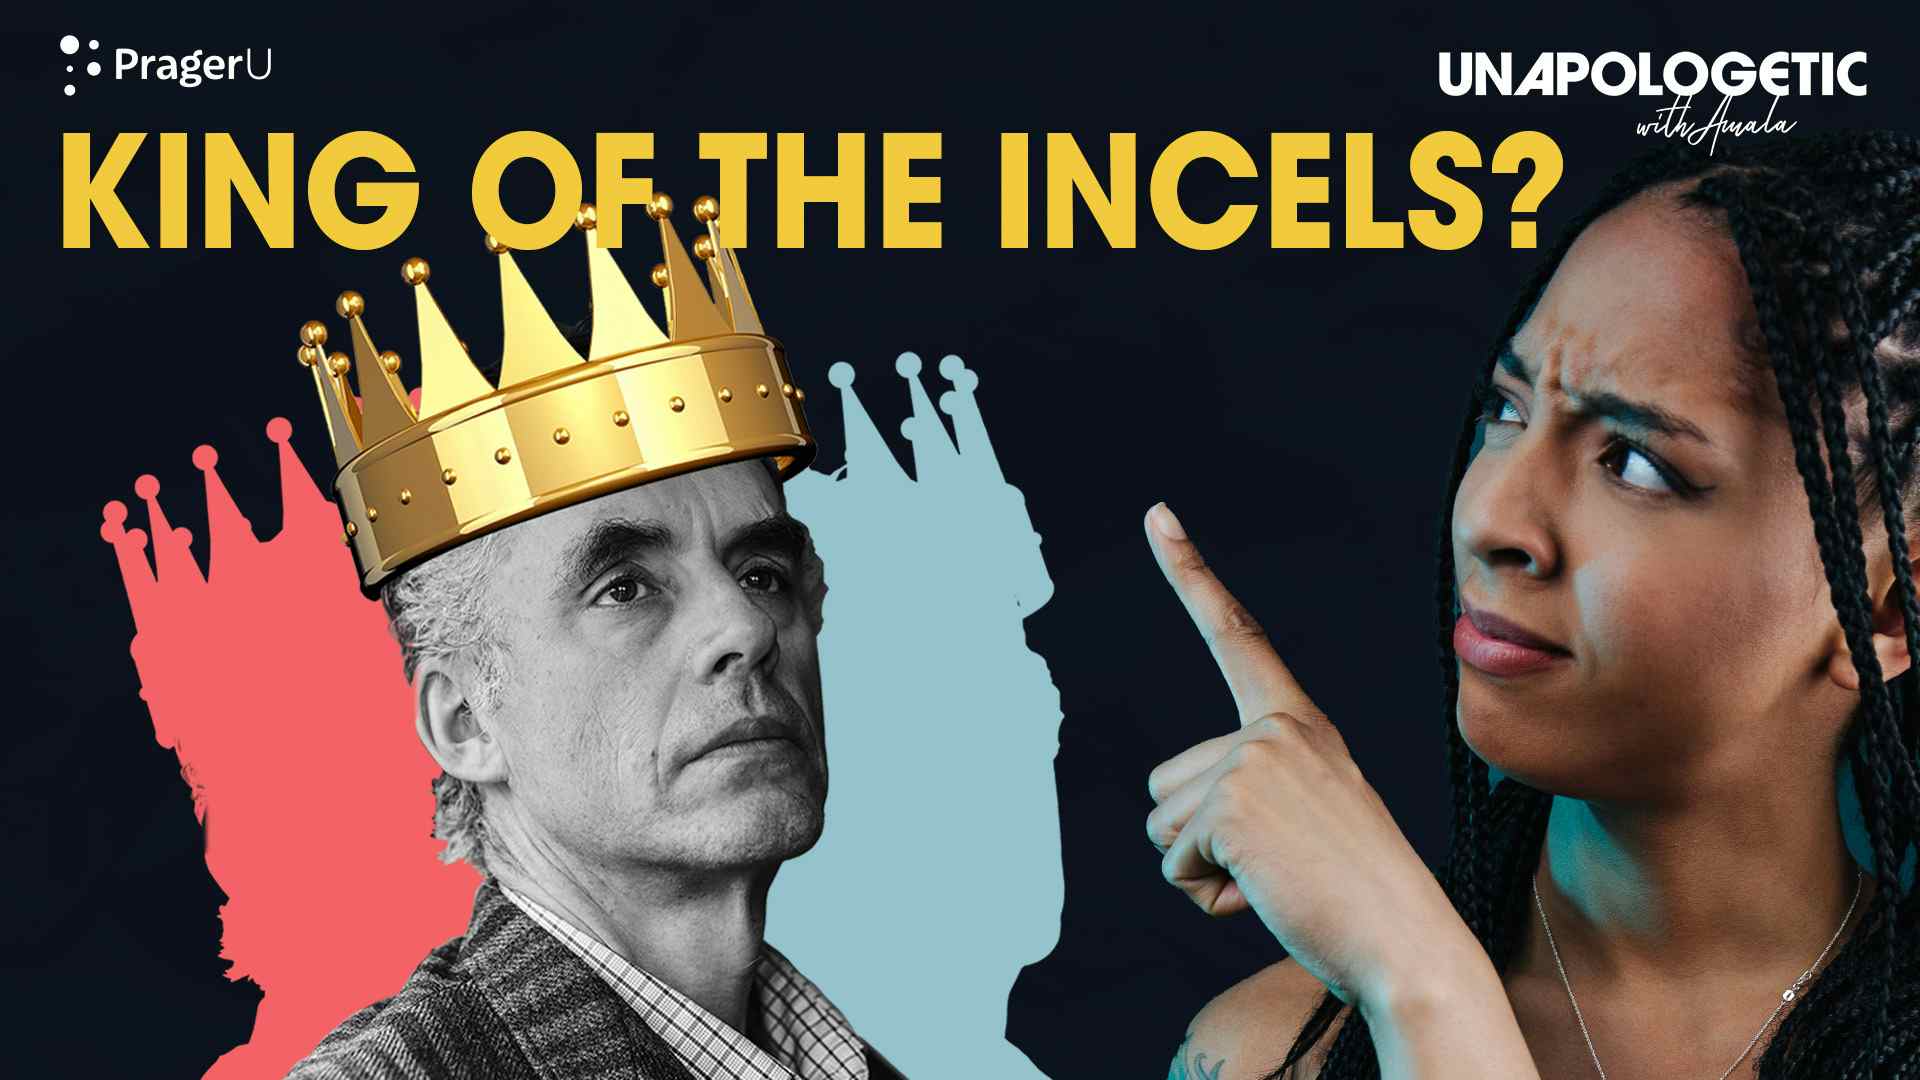 Jordan Peterson called “King of the Incels” and Reddit Surfing: 10/14/2022